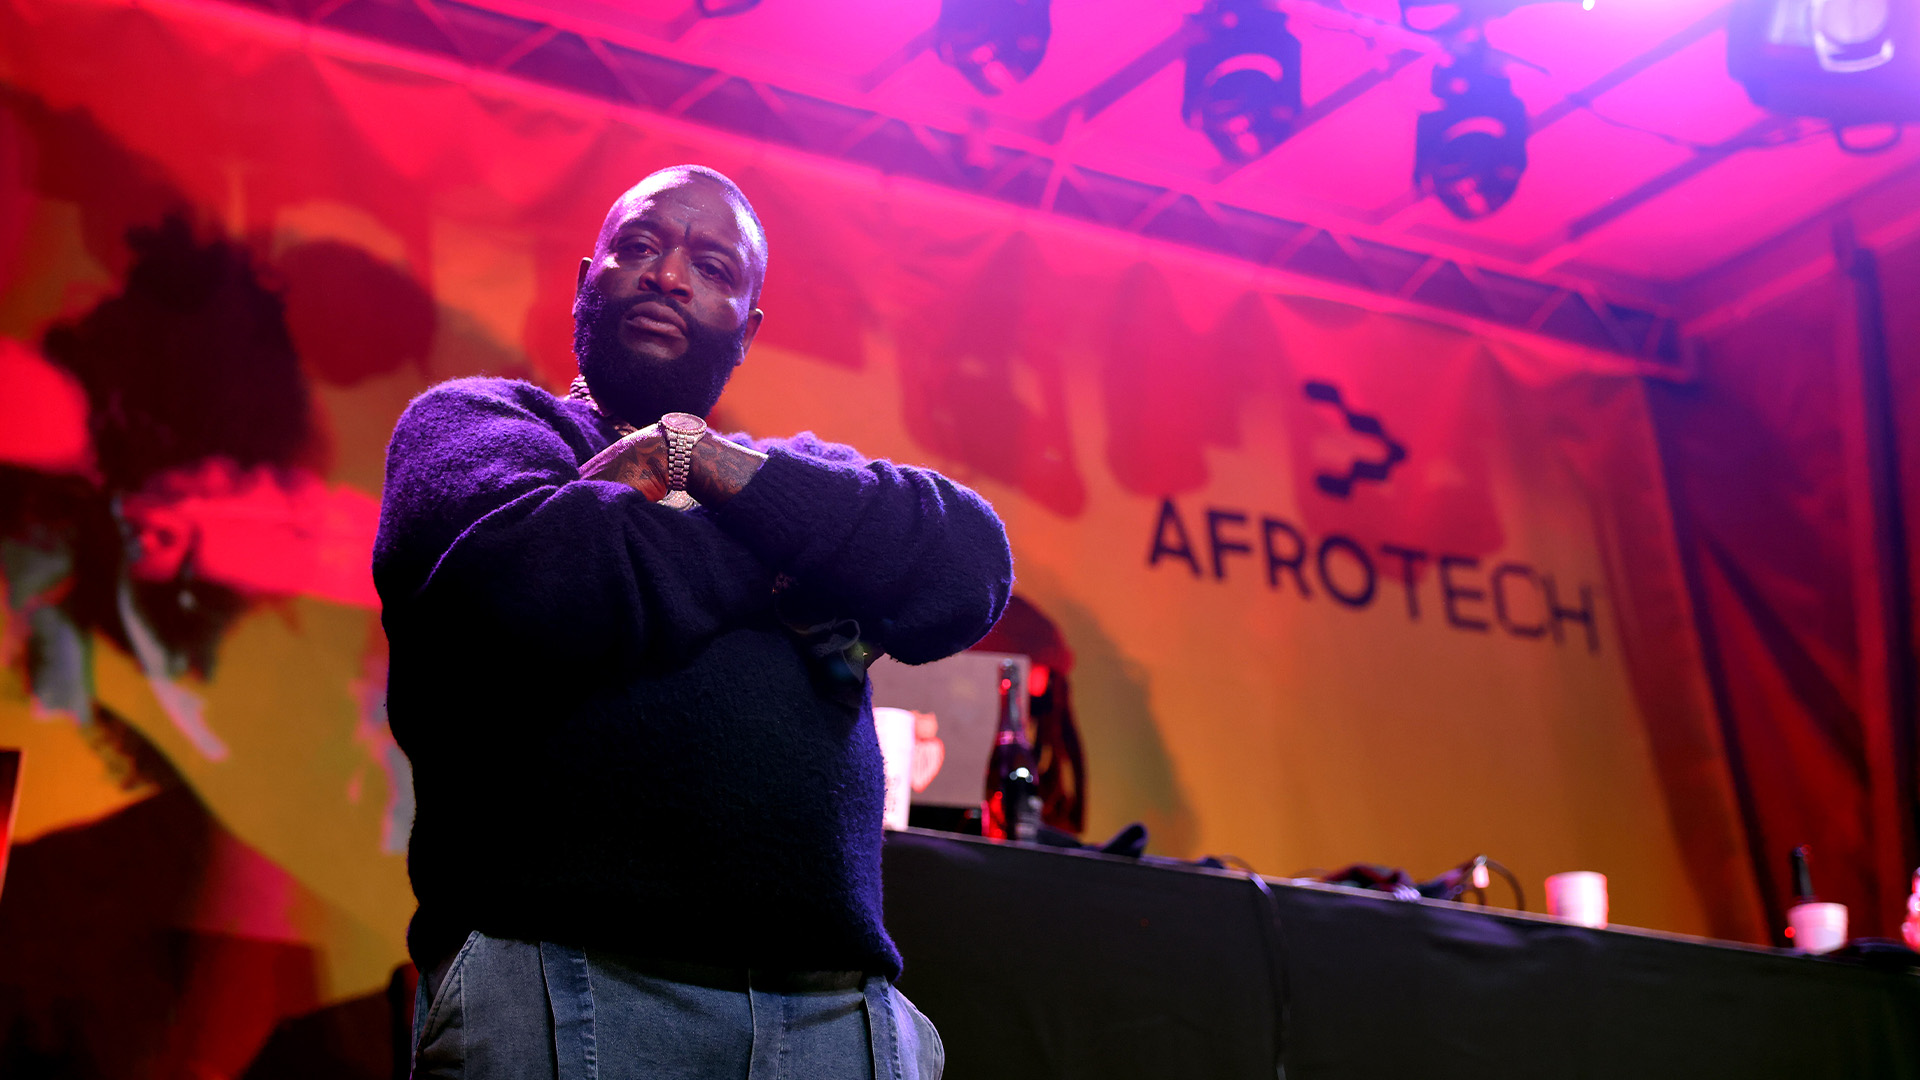 AFROTECH Conference 2023 Ended With A Music Stage Headlined By Saweetie, Rick Ross, And More — Here's What Went Down